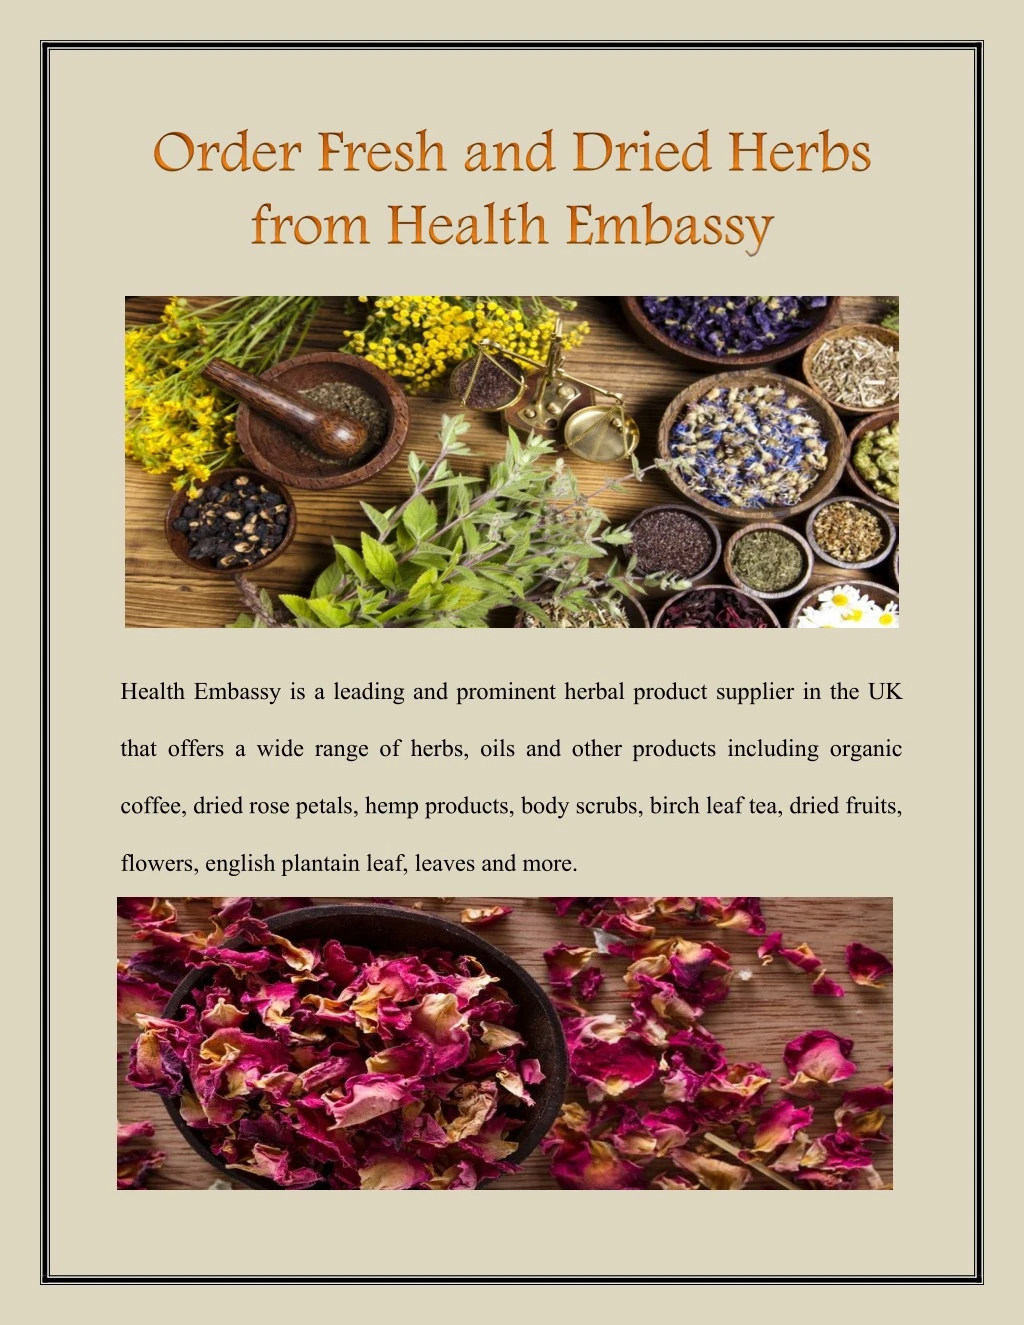 health embassy is a leading and prominent herbal